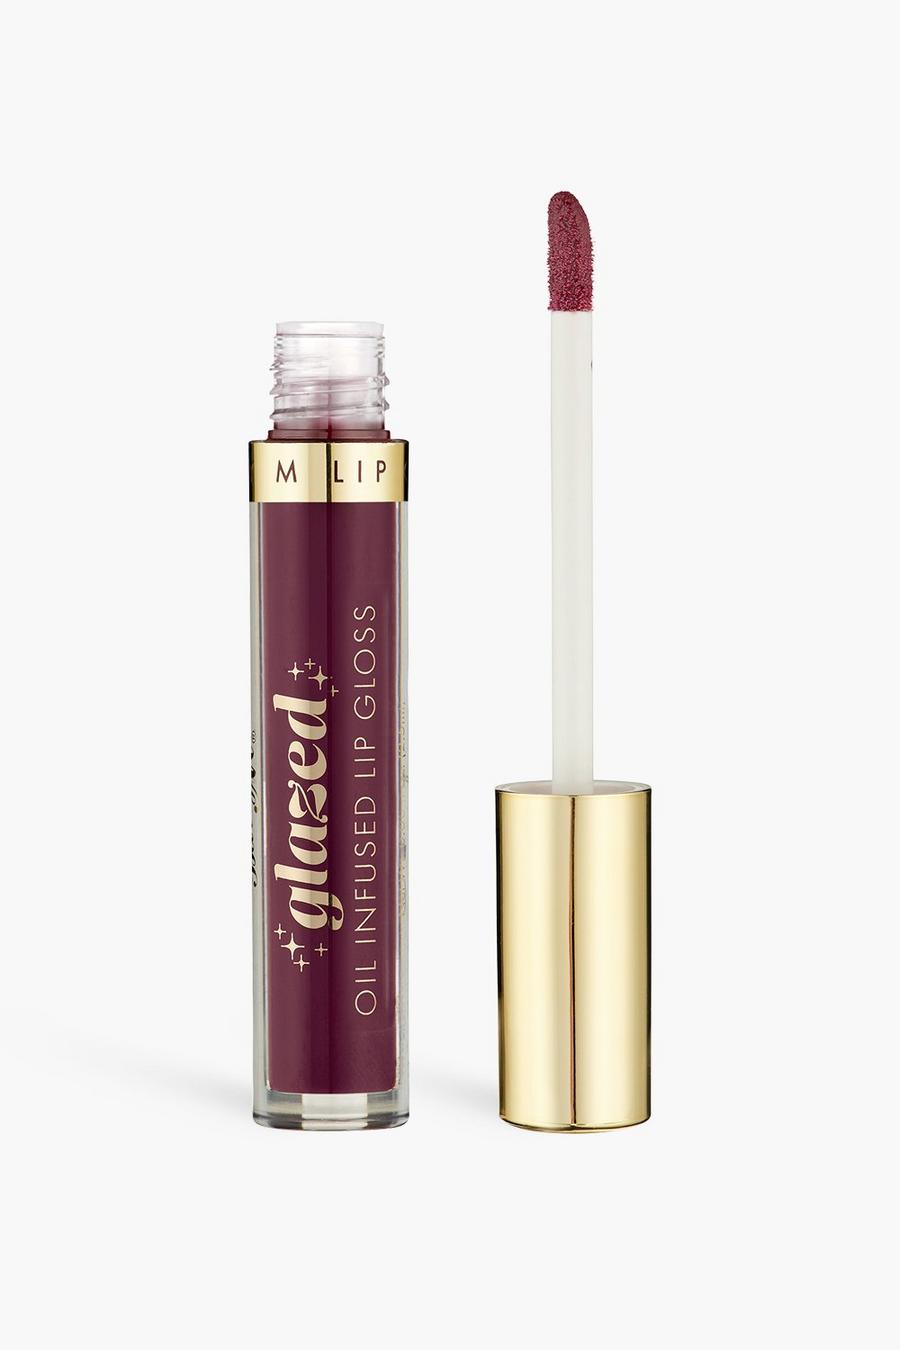 Berry rouge Barry M Glazed Oil Lip Gloss - So Tempting